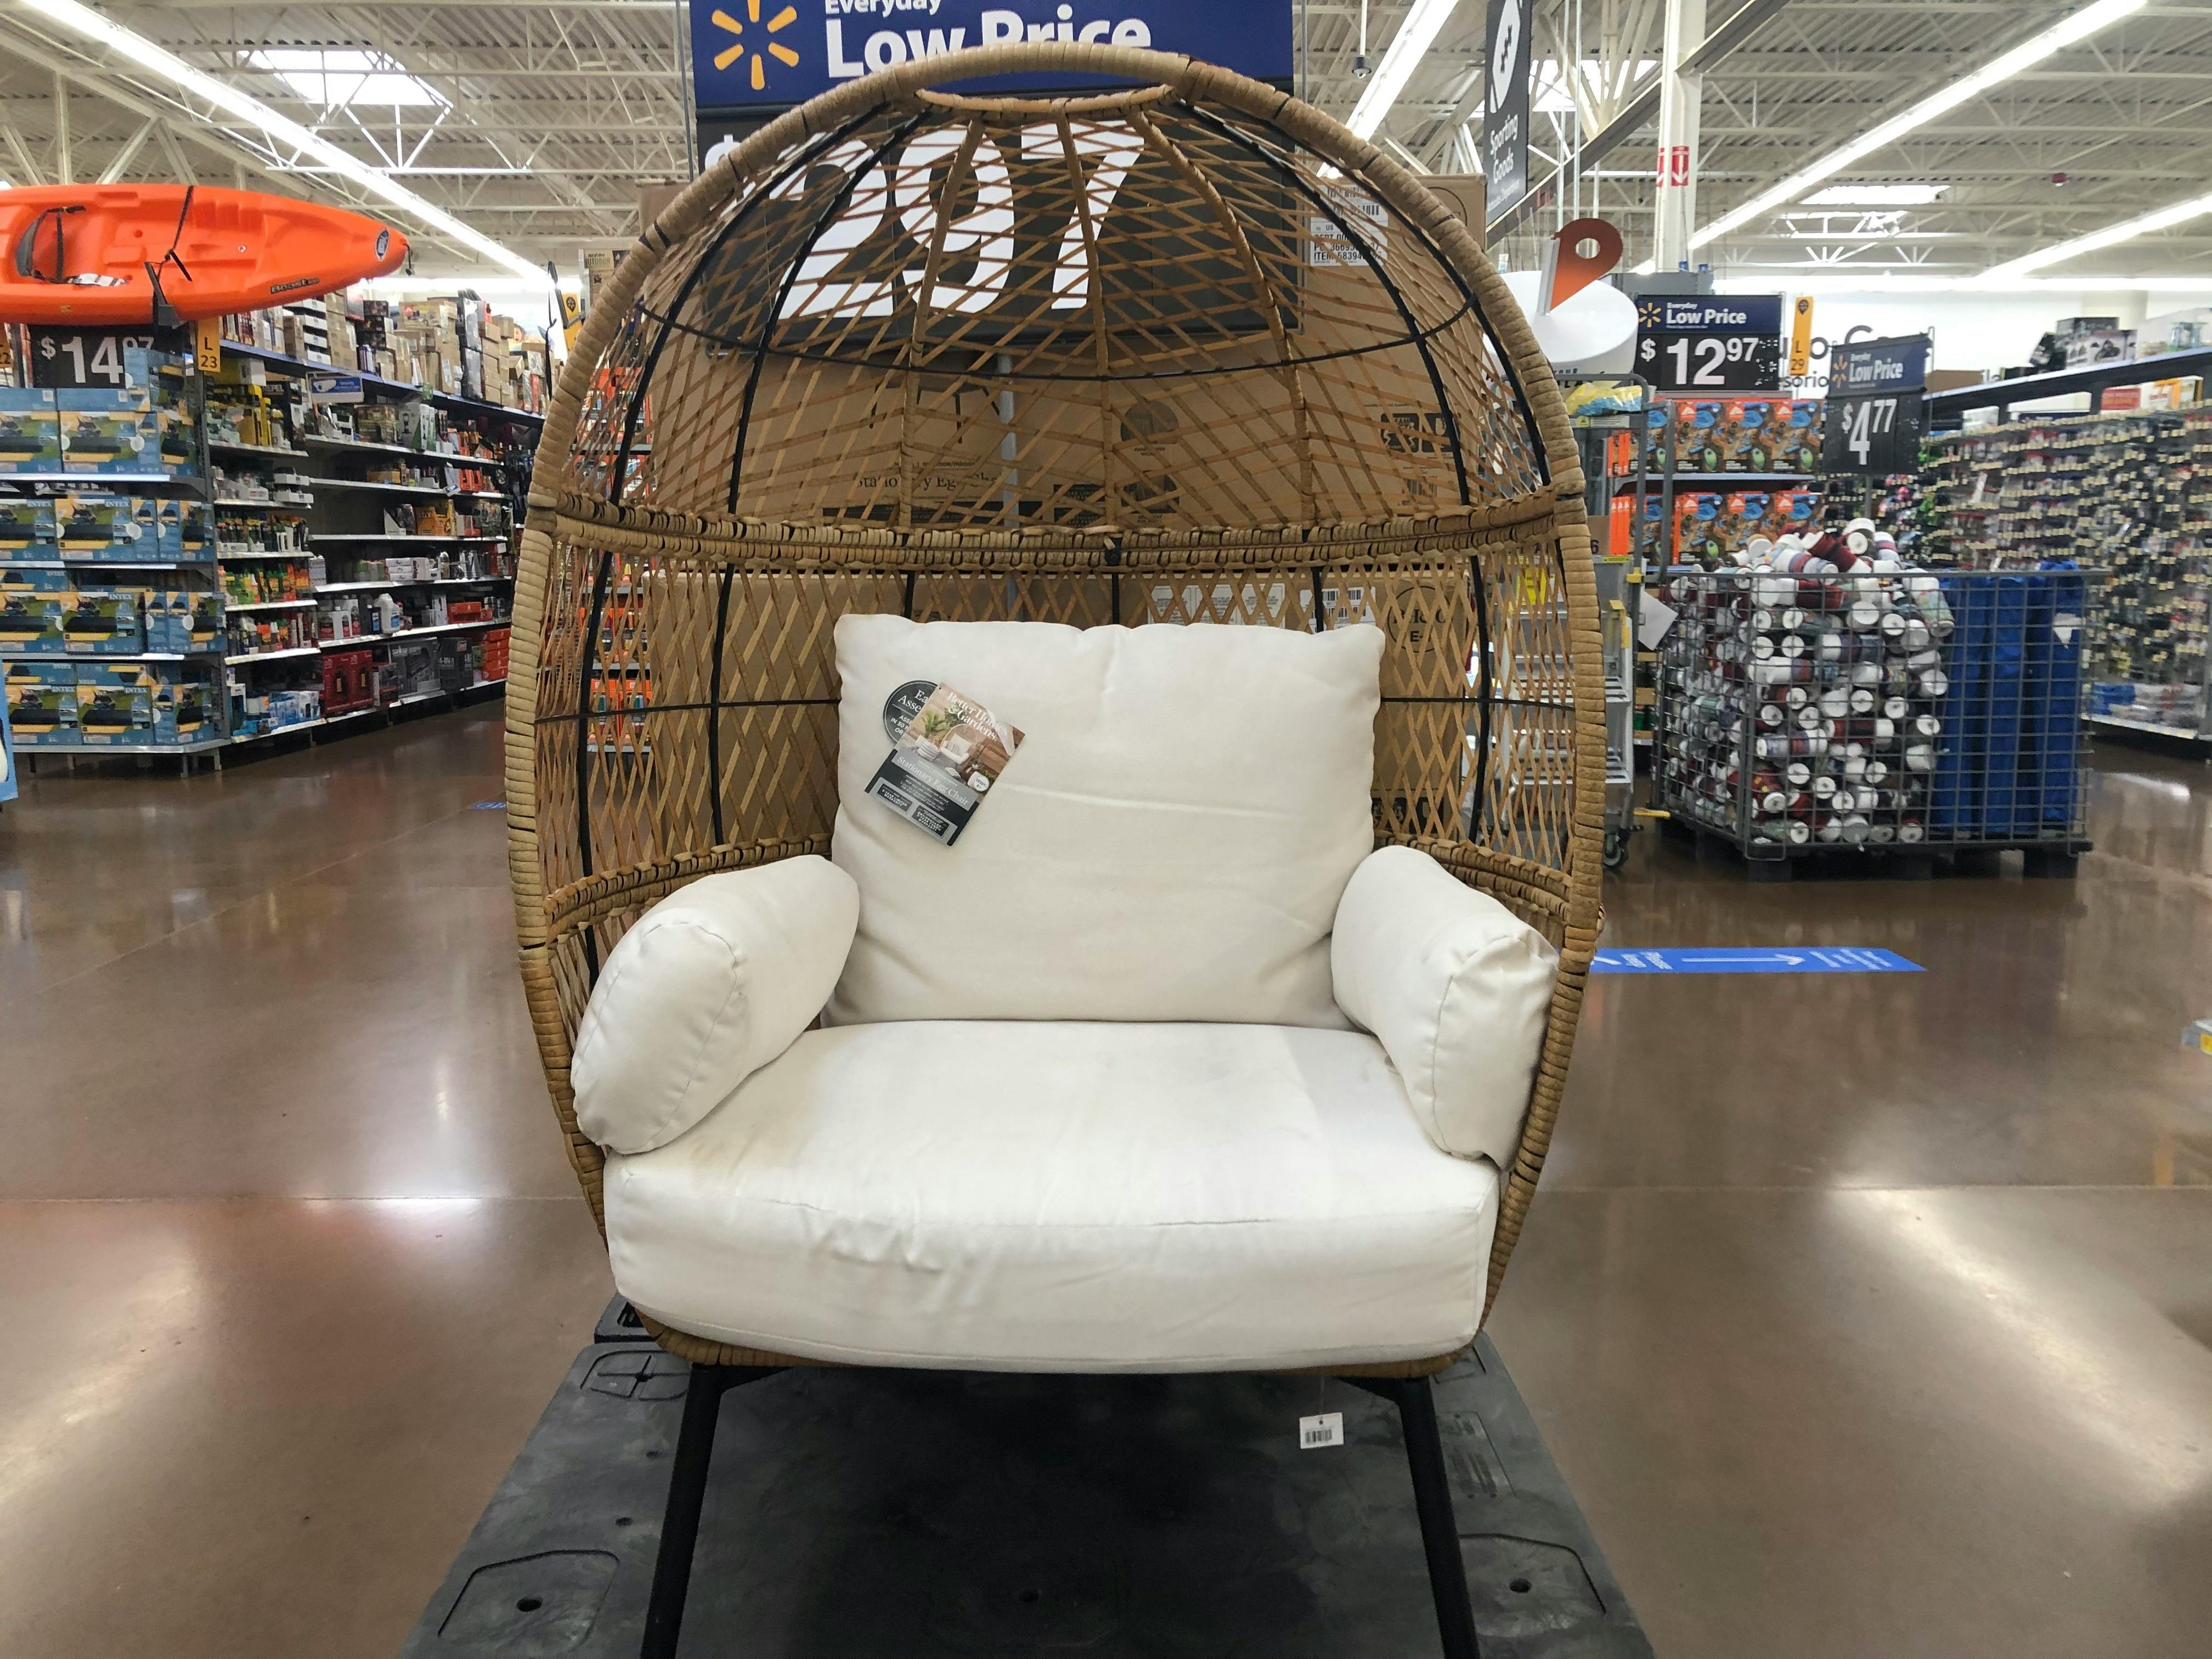 Egg Chair In Stock At Walmart The Krazy Coupon Lady